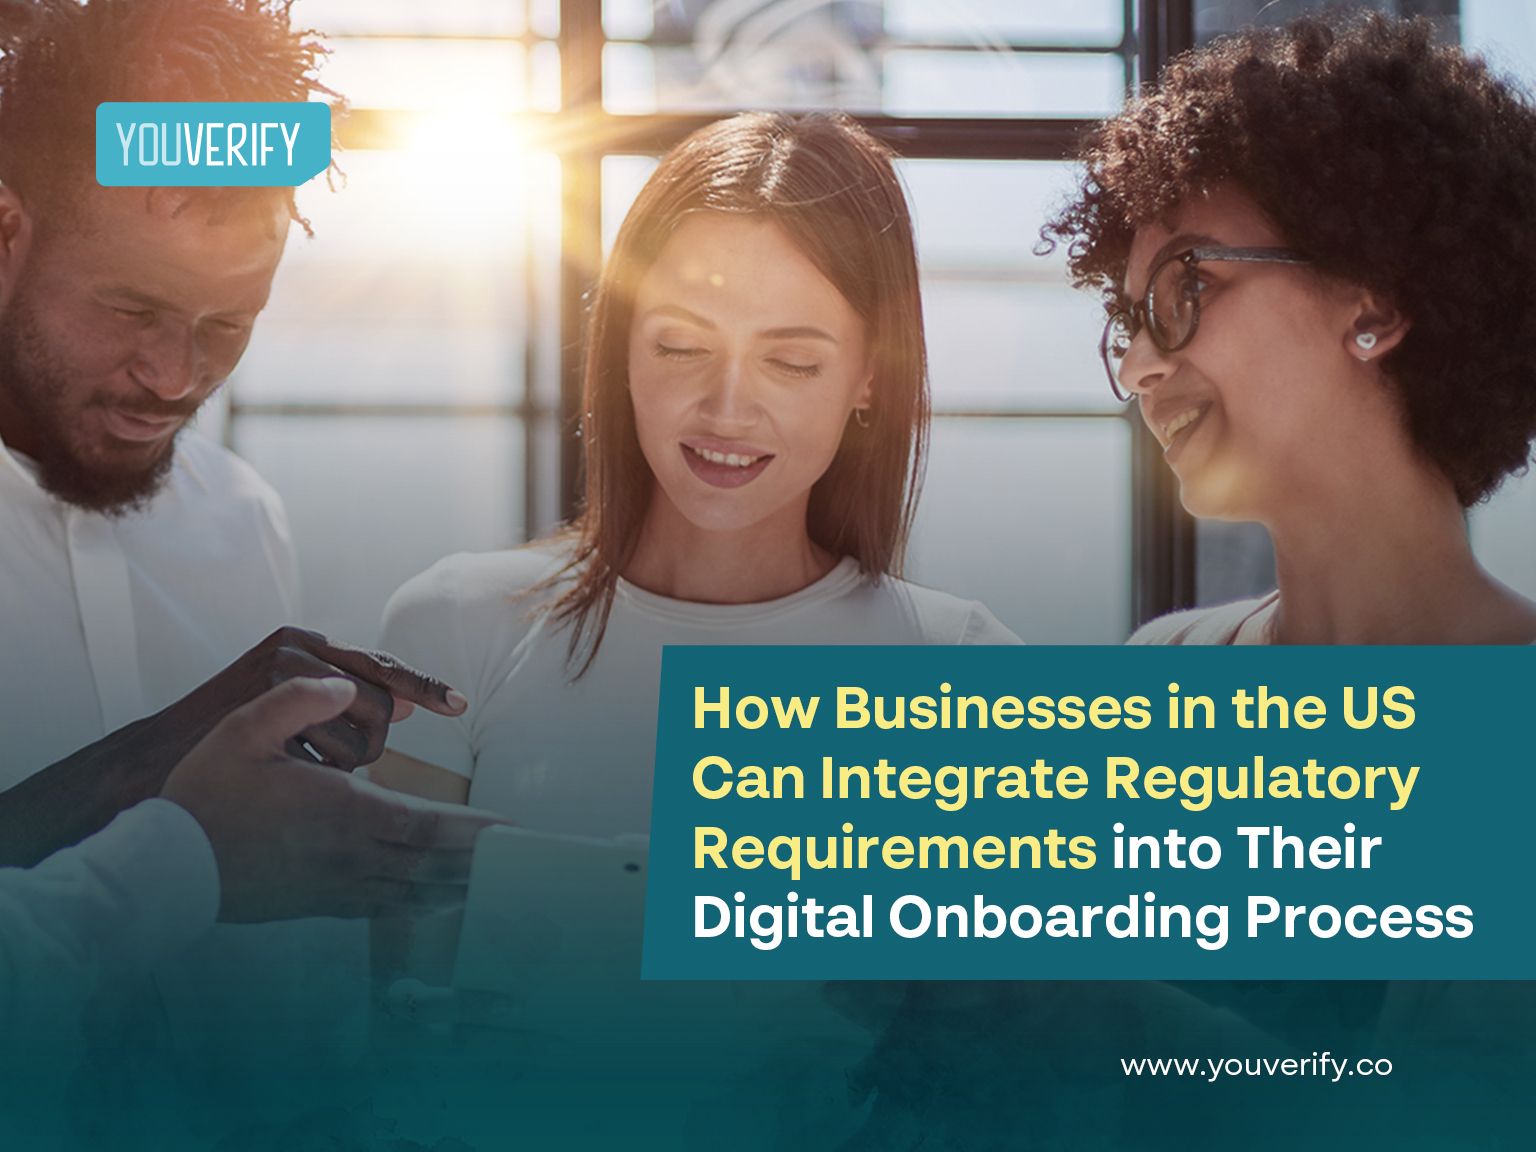 How US Businesses Can Integrate Regulatory Requirements into Their Digital Onboarding Process